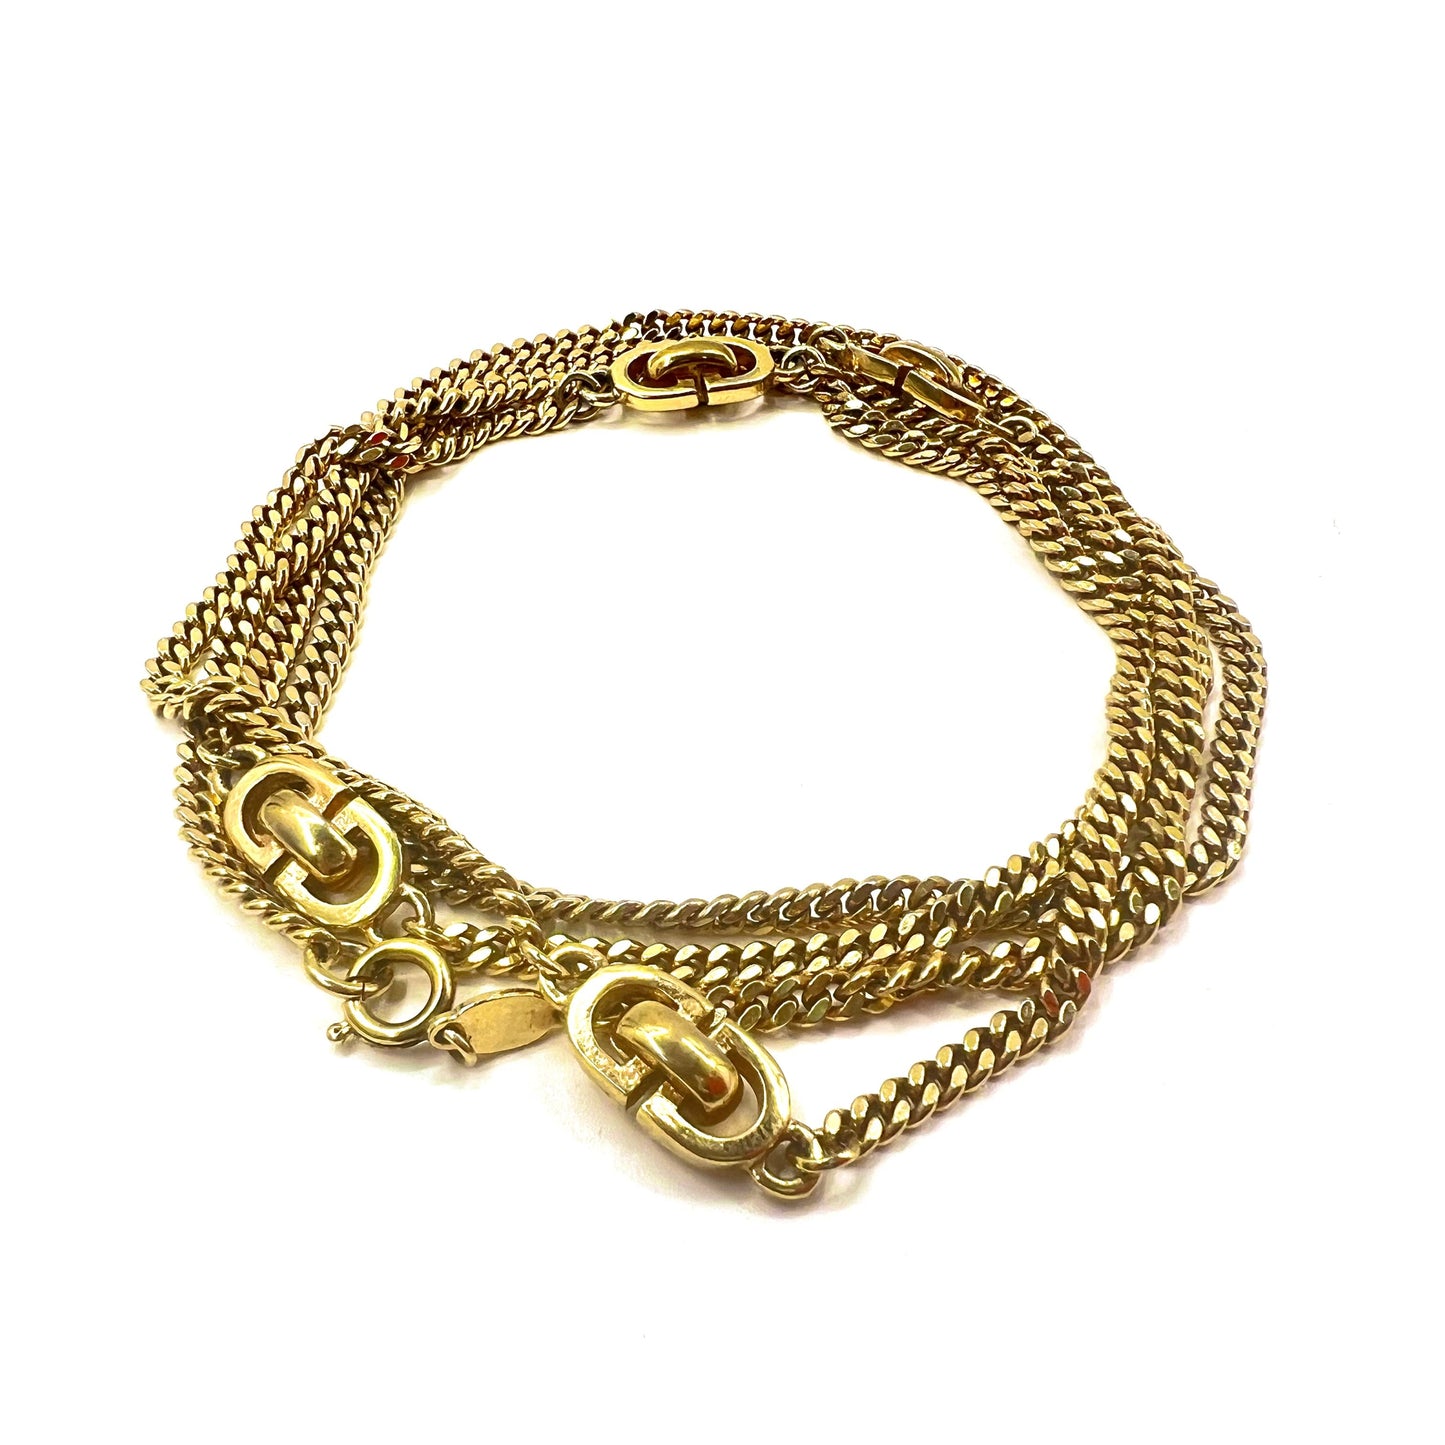 Christian DIOR 2way bracelet logo necklace Gold chain Germany MADE